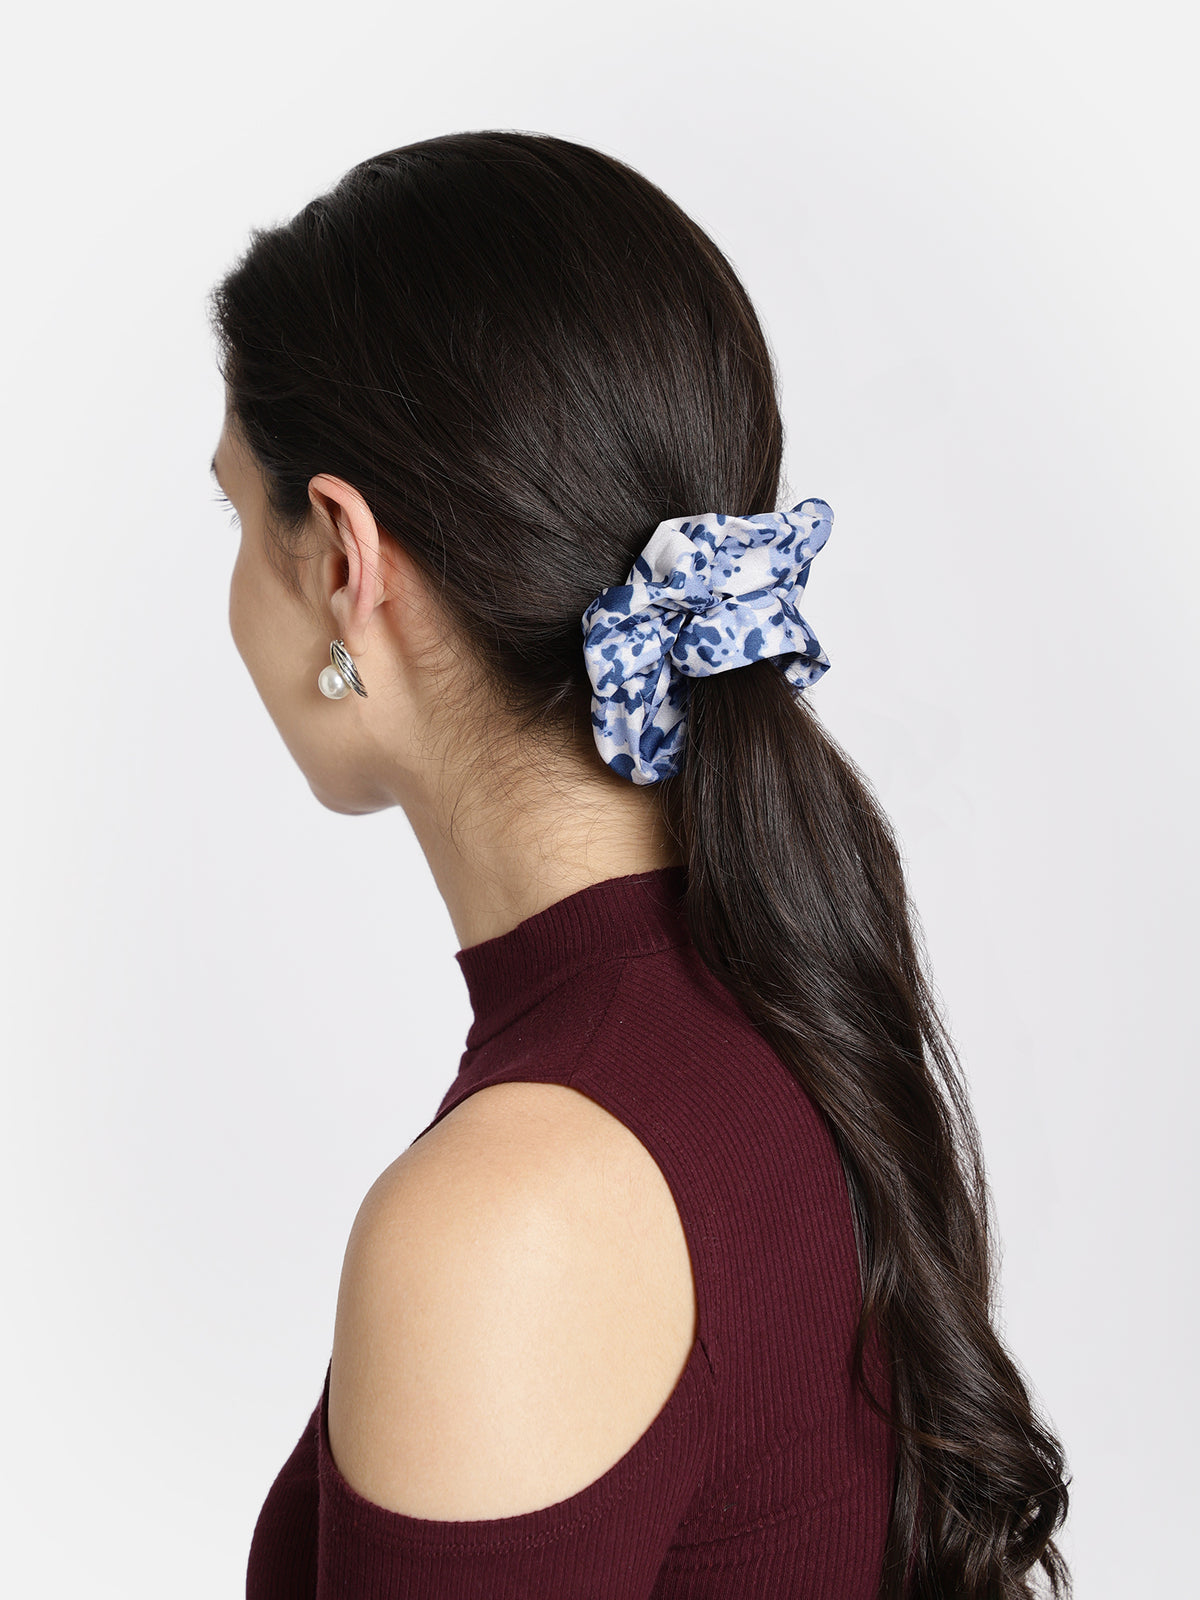 Off White Color Printed Headband and Scrunchy